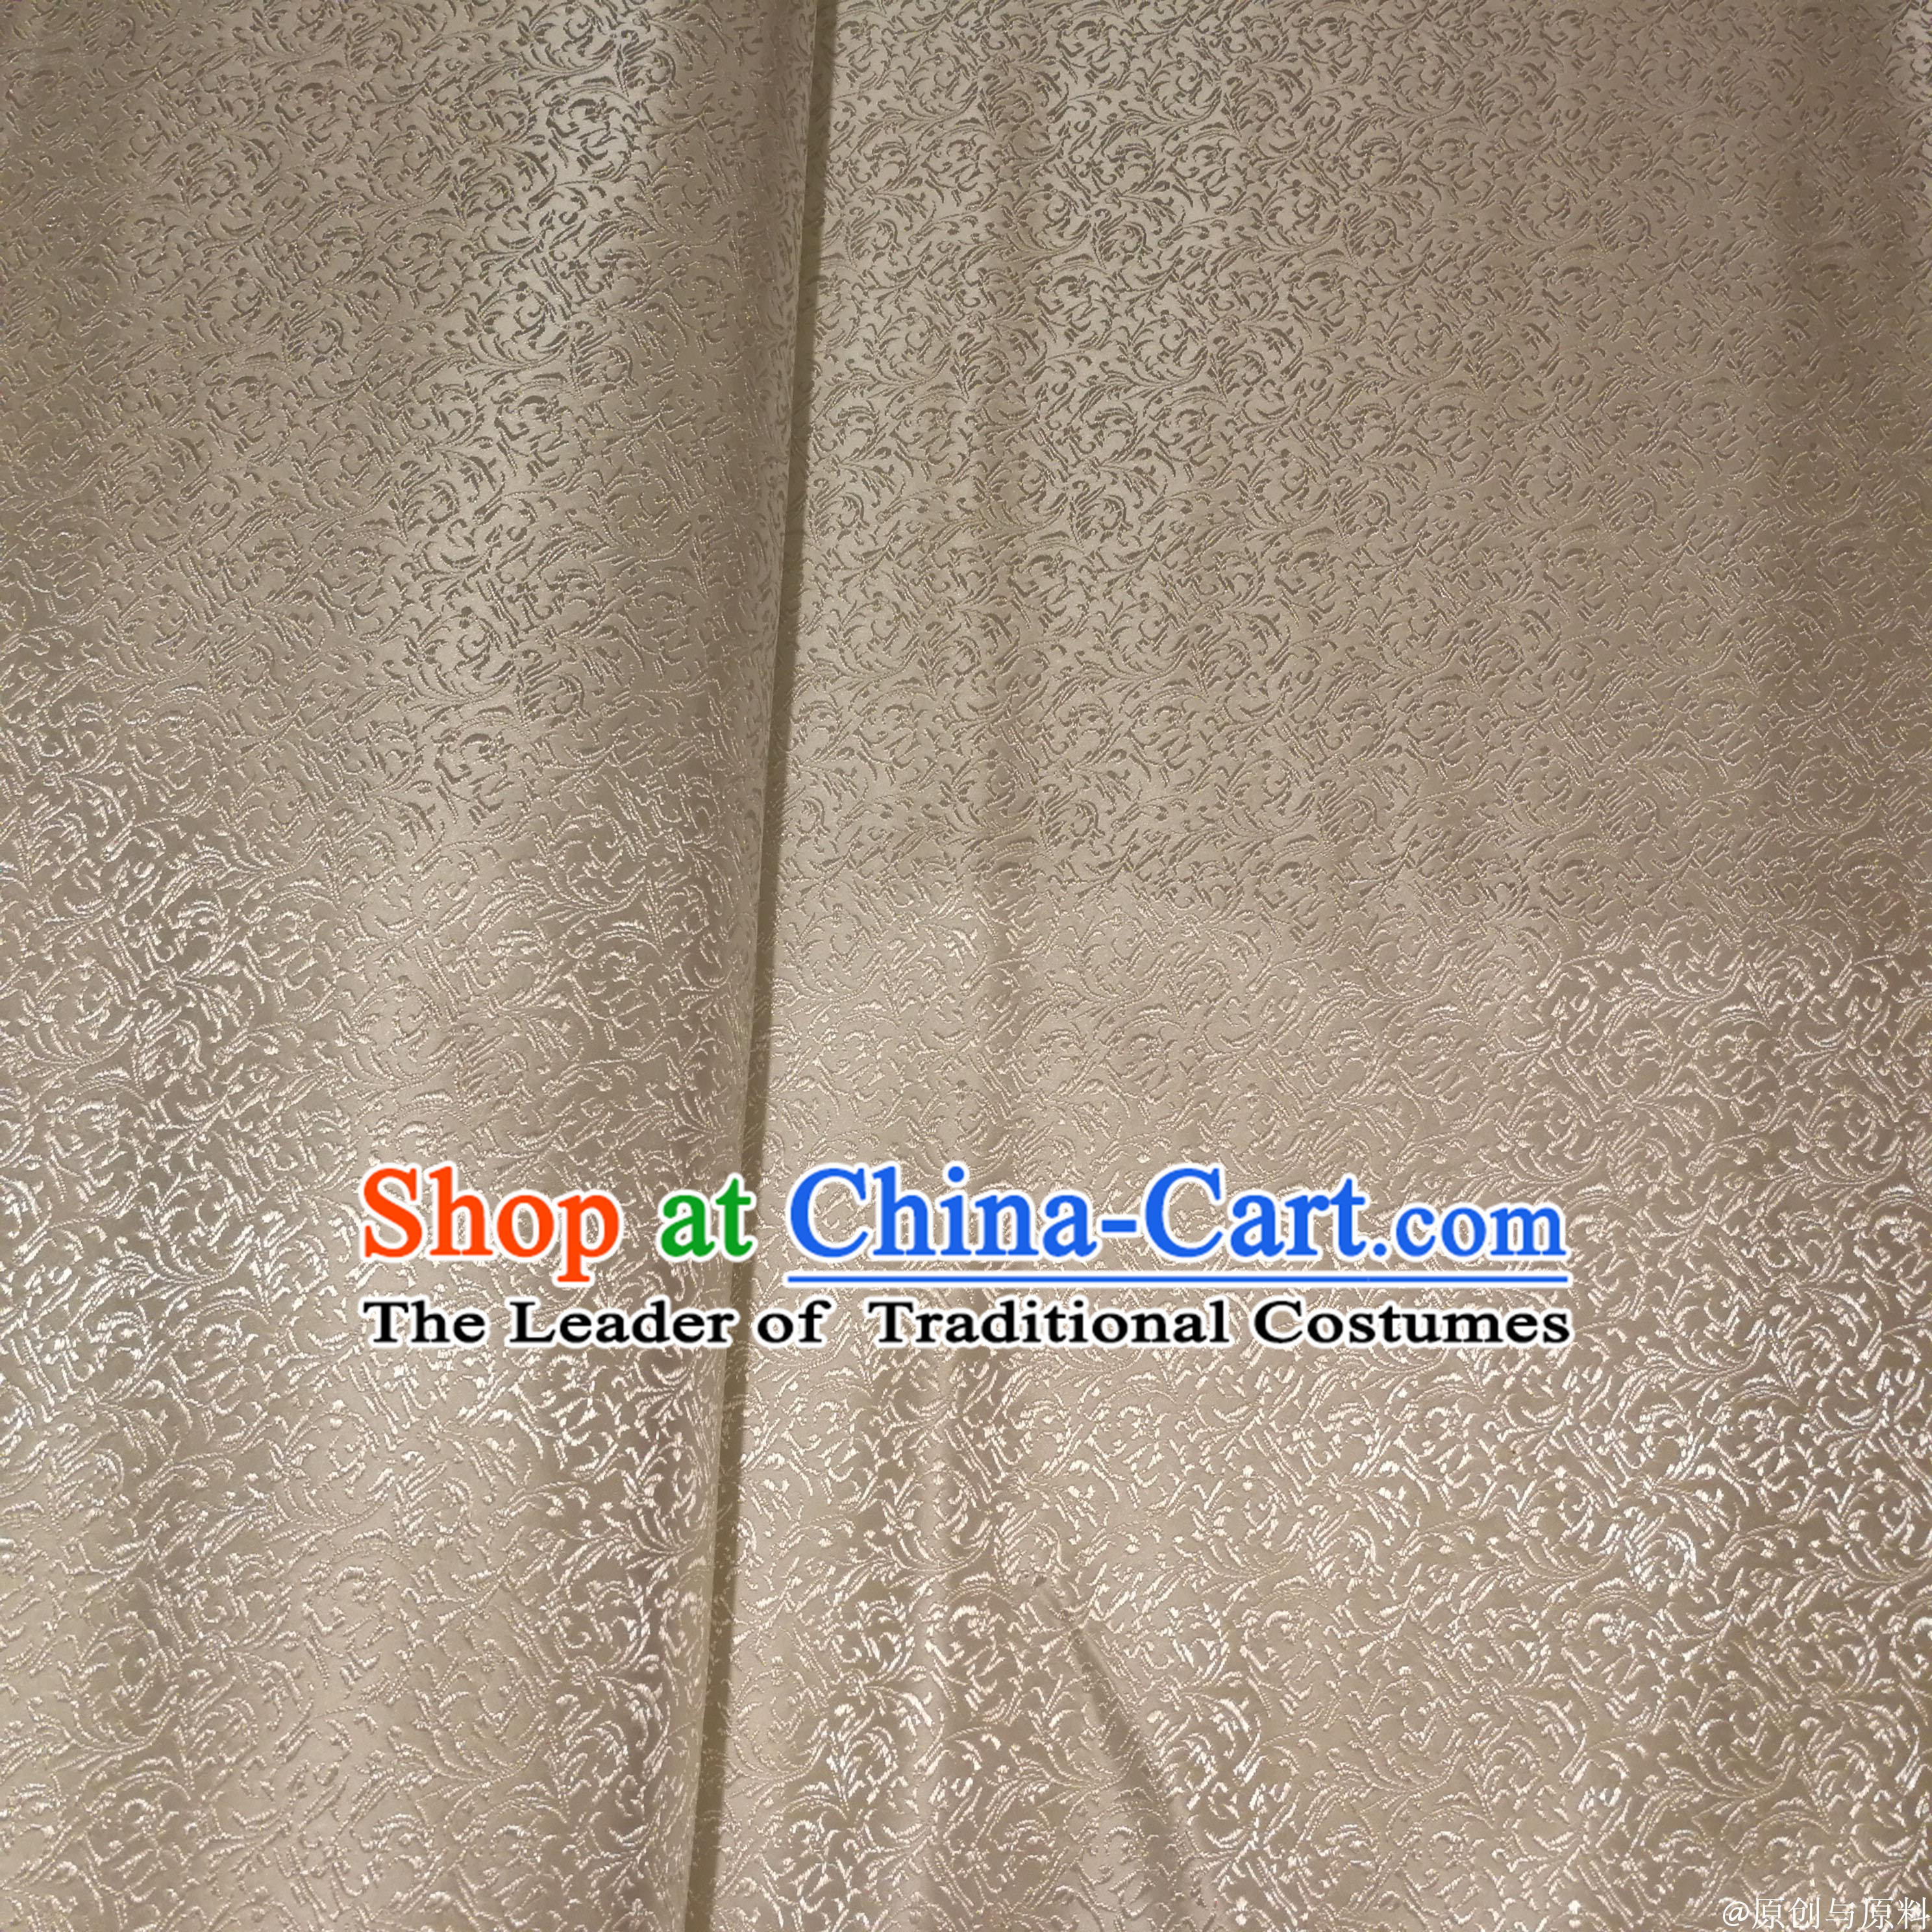 White Color Chinese Royal Palace Style Traditional Pattern Flower Design Brocade Fabric Silk Fabric Chinese Fabric Asian Material